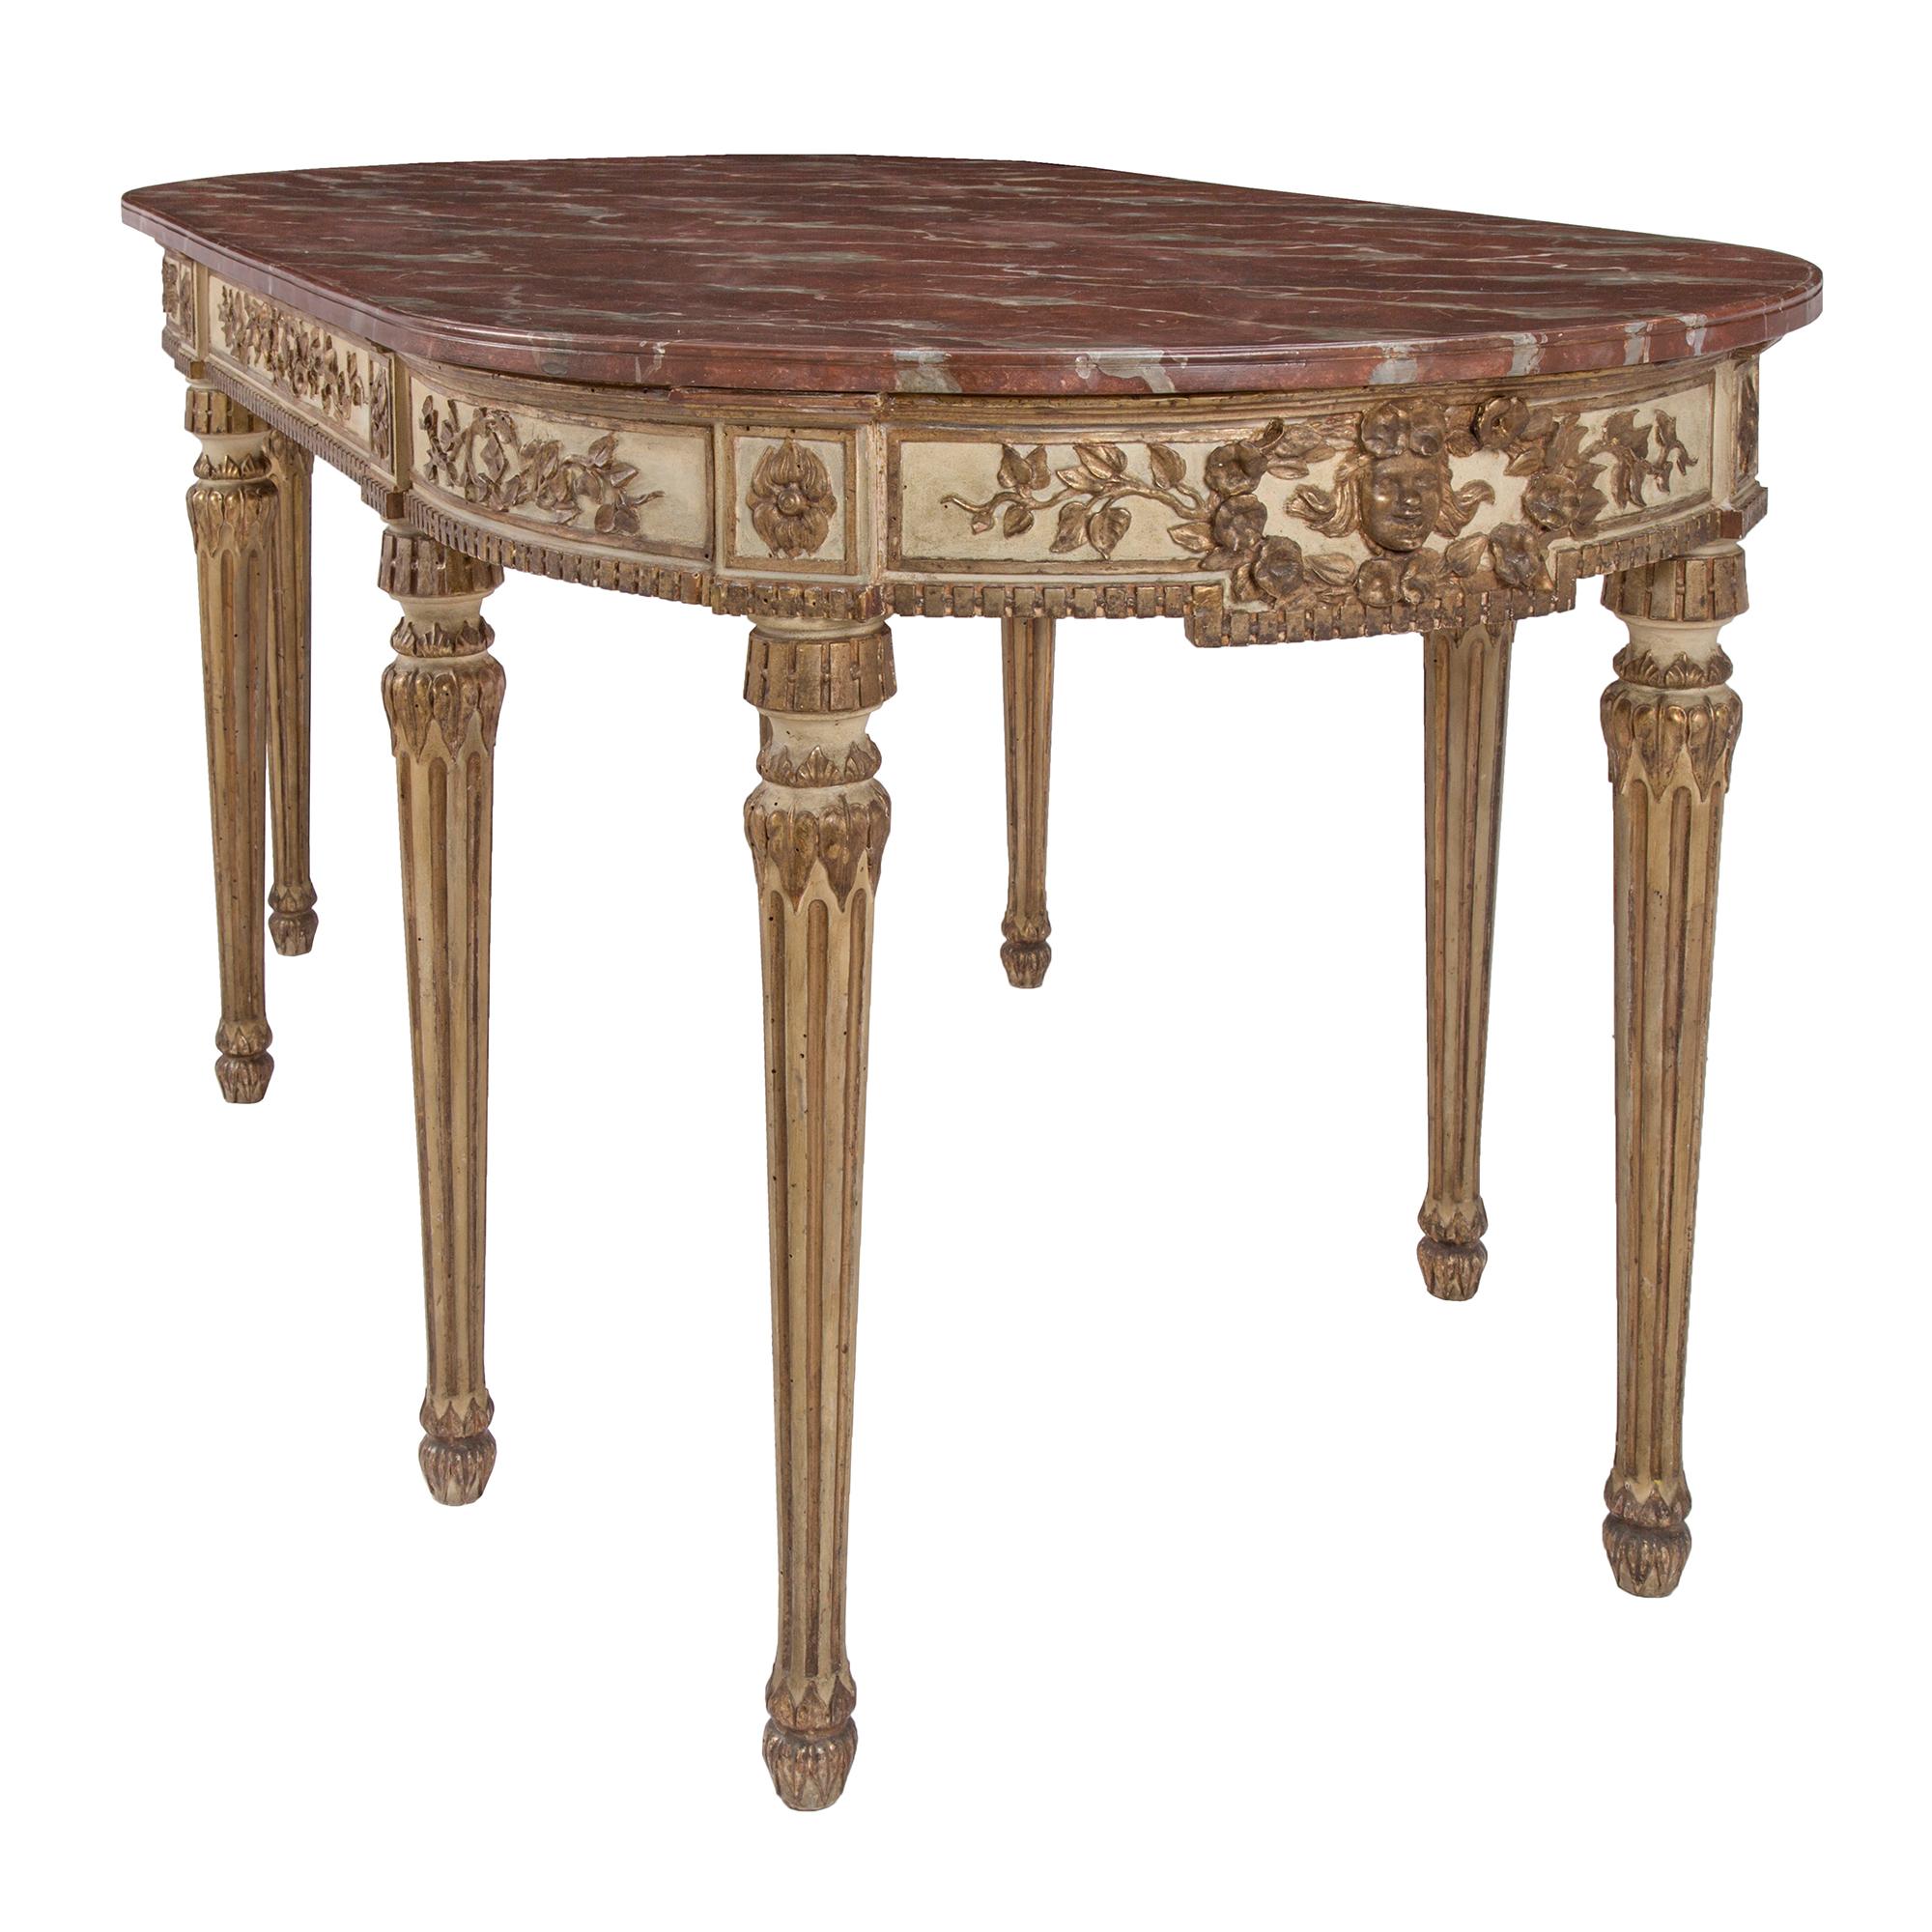 Patinated Italian 19th Century Louis XVI Style Eight Leg Oval Center Table from Naples For Sale